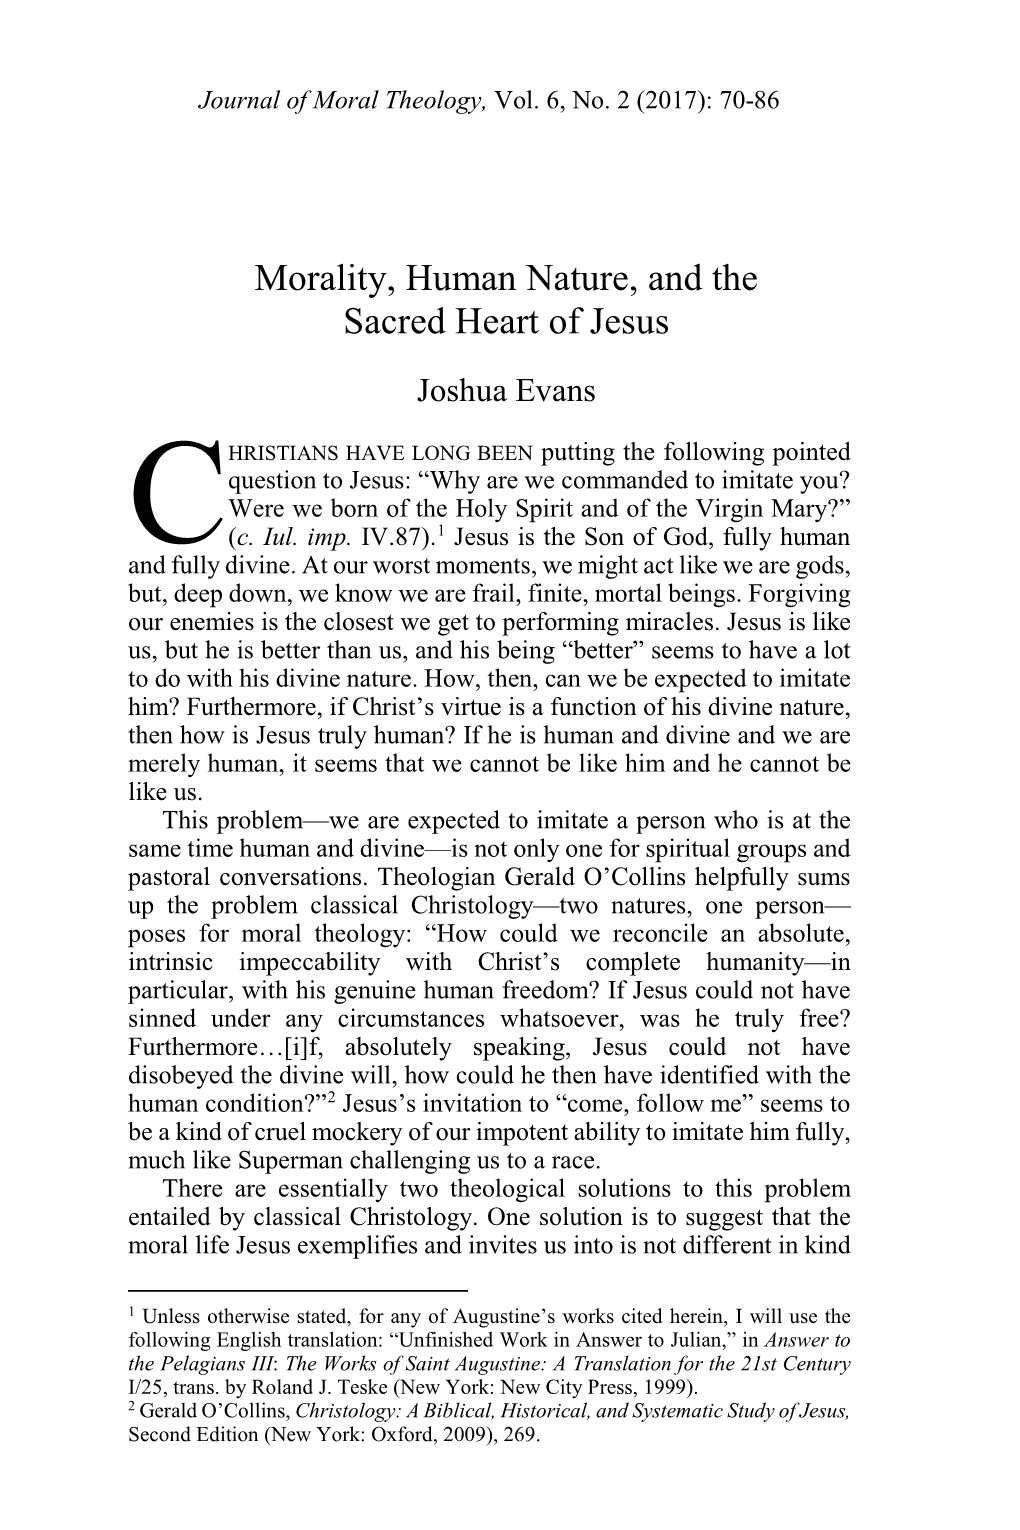 Morality, Human Nature, and the Sacred Heart of Jesus